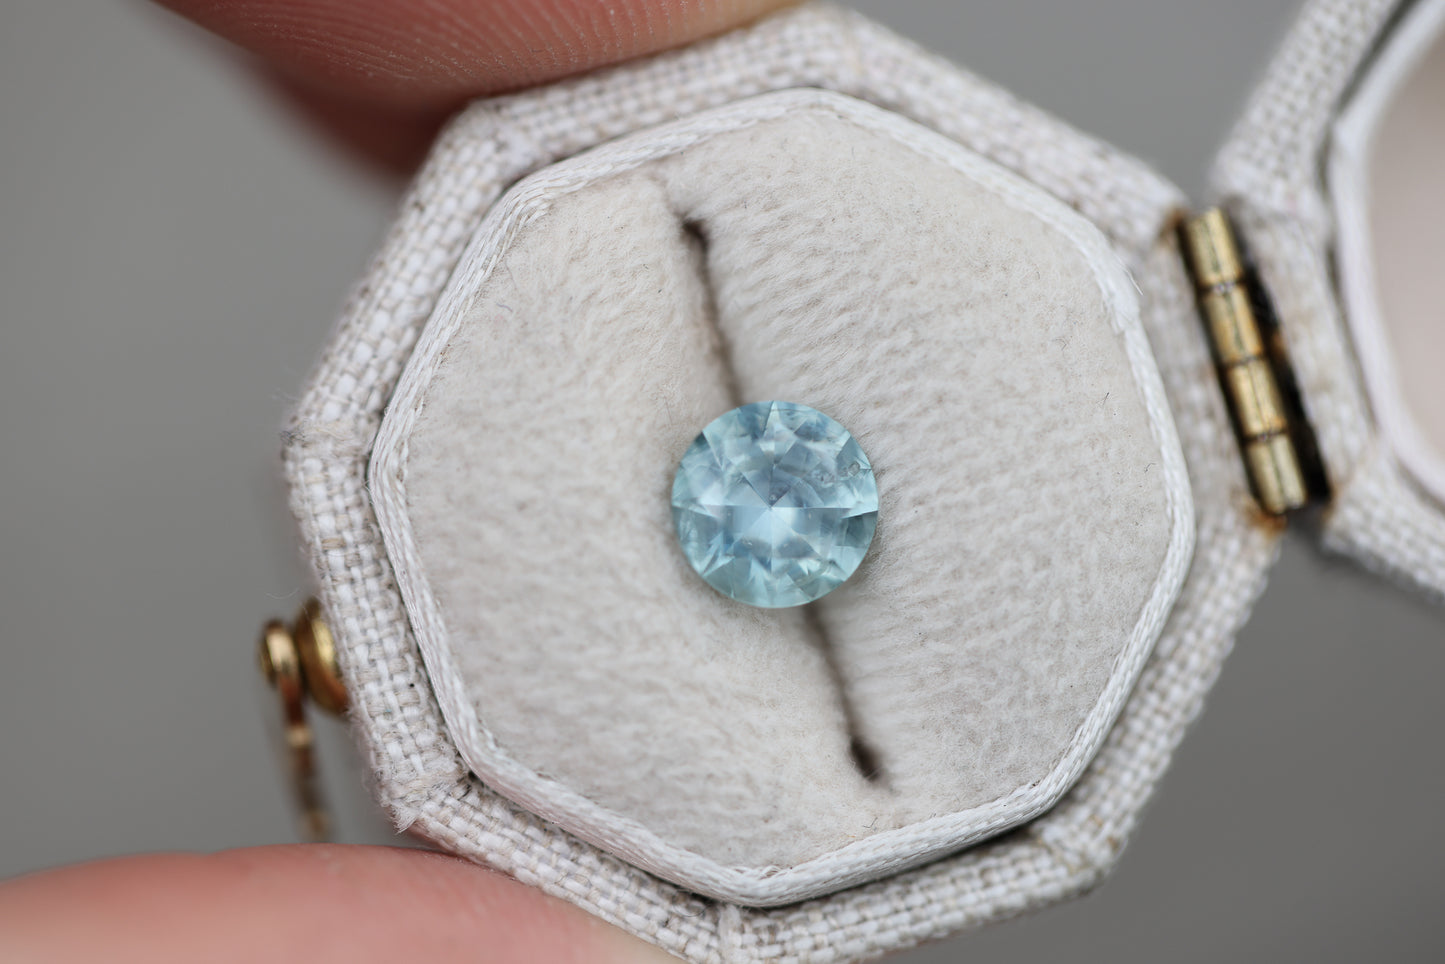 Load image into Gallery viewer, 1.26ct round opaque teal blue sapphire
